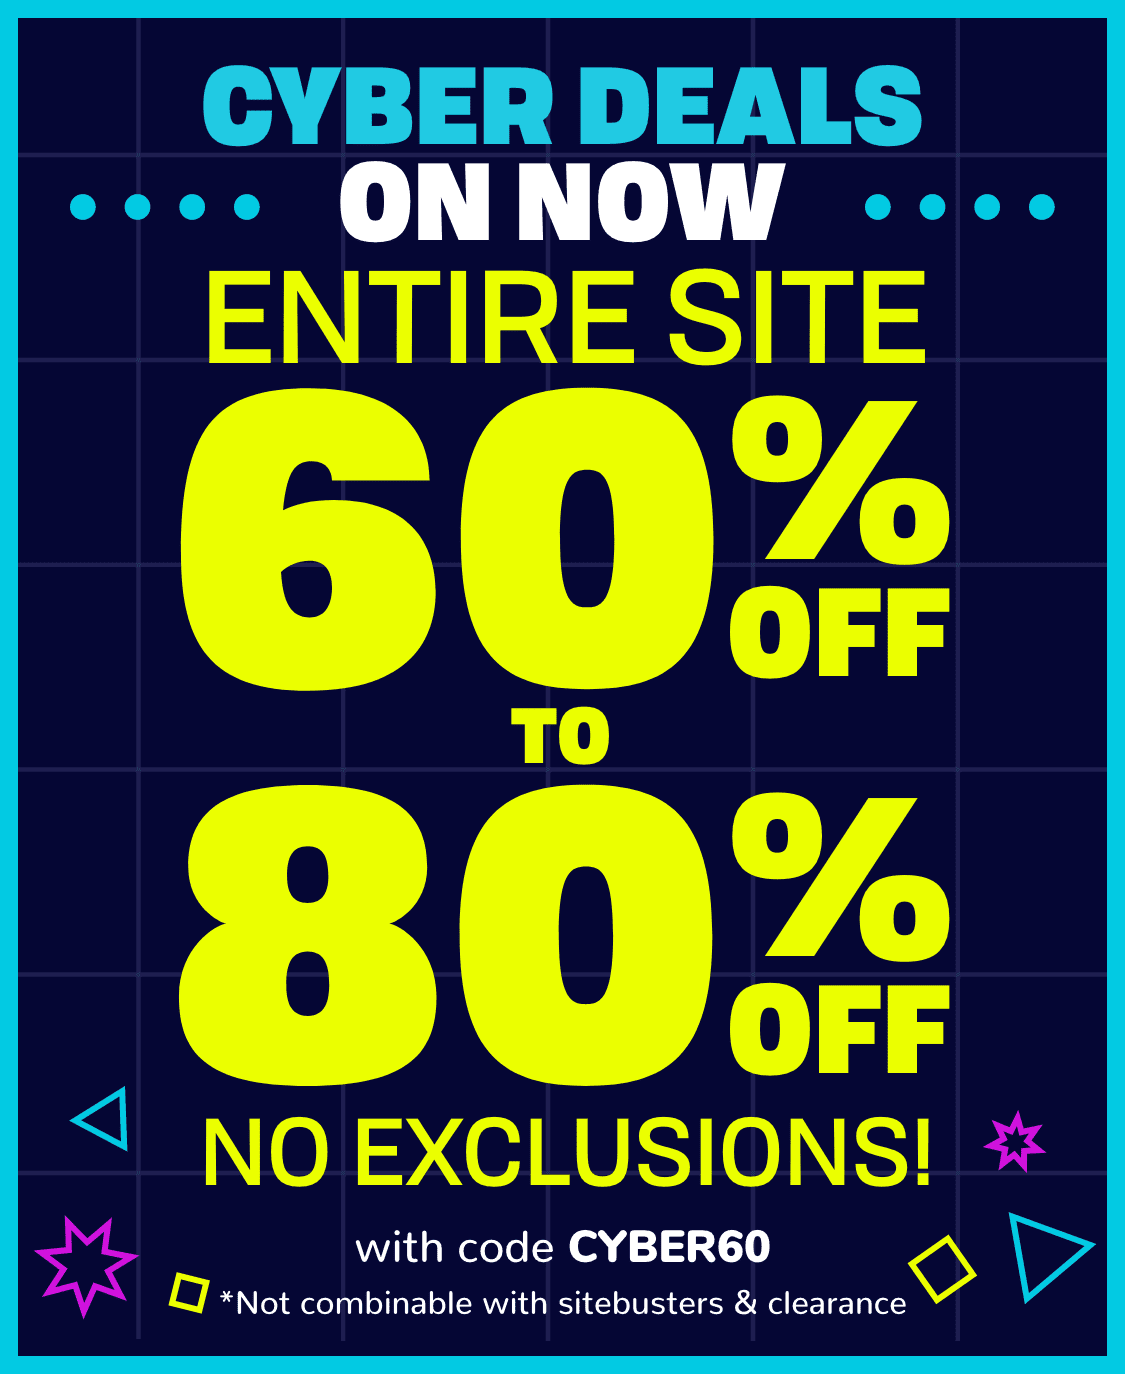 Cyber Monday STARTS NOW! 60% OFF ENTIRE SITE with code CYBER60 *NOT COMBINABLE WITH sitebusters & clearance